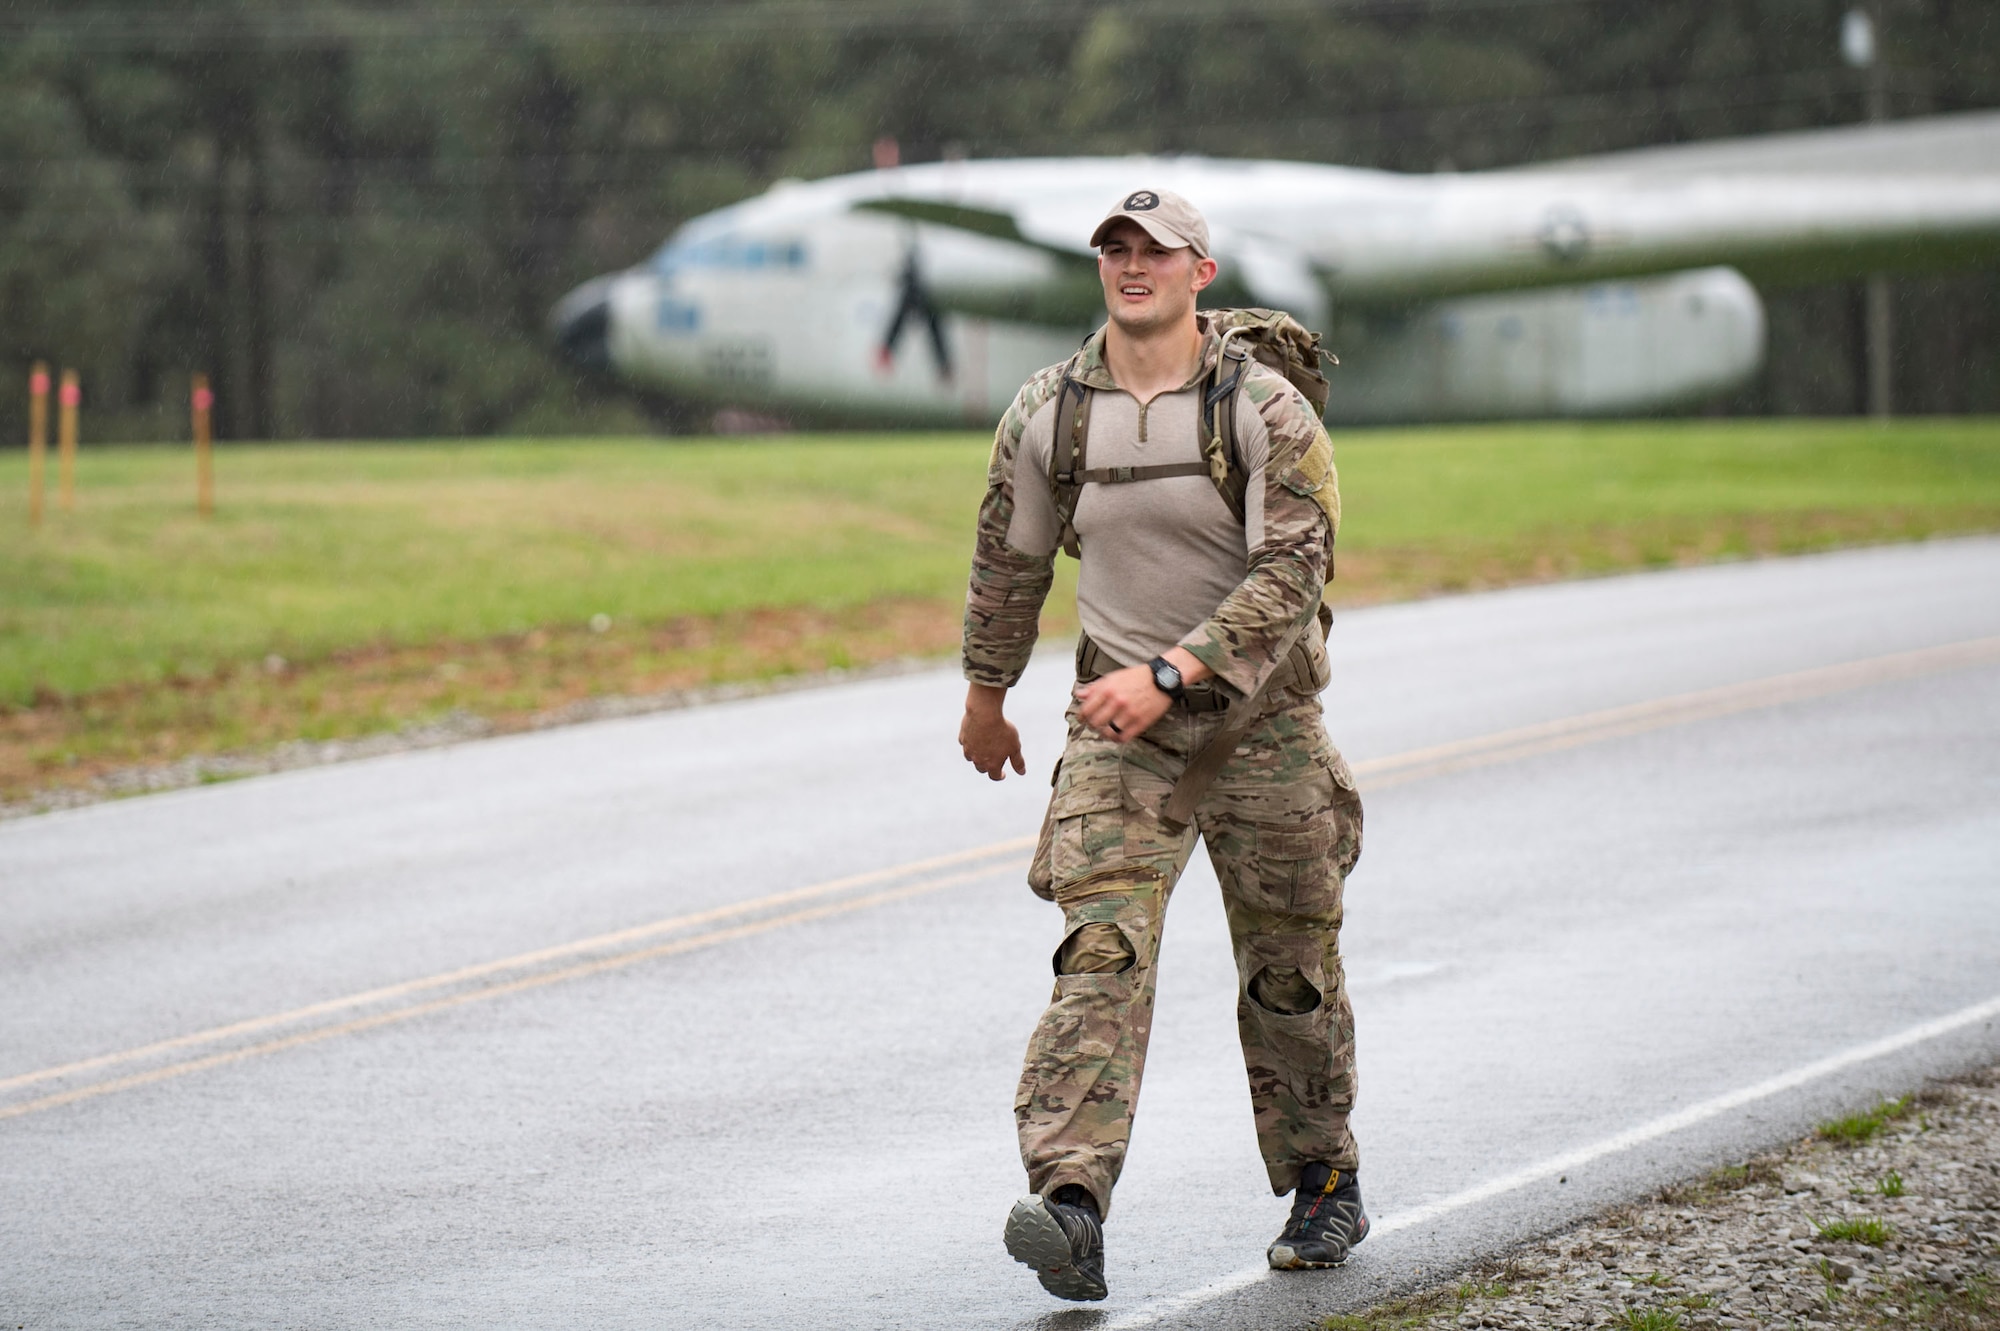 U.S. Air Force Staff Sgt. Kenneth Bartle, 19th Air Support Operations Squadron Tactical Air Control Party specialist finishes a rucksack march during a German armed forces proficiency assessment, April 6, 2017, at Fort Campbell, Ky. To enhance their ability to work together in deployed locations, members of the German Air Force travelled to Fort Campbell to train and exercise with the 19th ASOS. While at Fort Campbell, The German Air Force members hosted a German armed forces proficiency assessment for Airmen consisting of shooting firearms, swimming, agility exercises and a rucksack march.